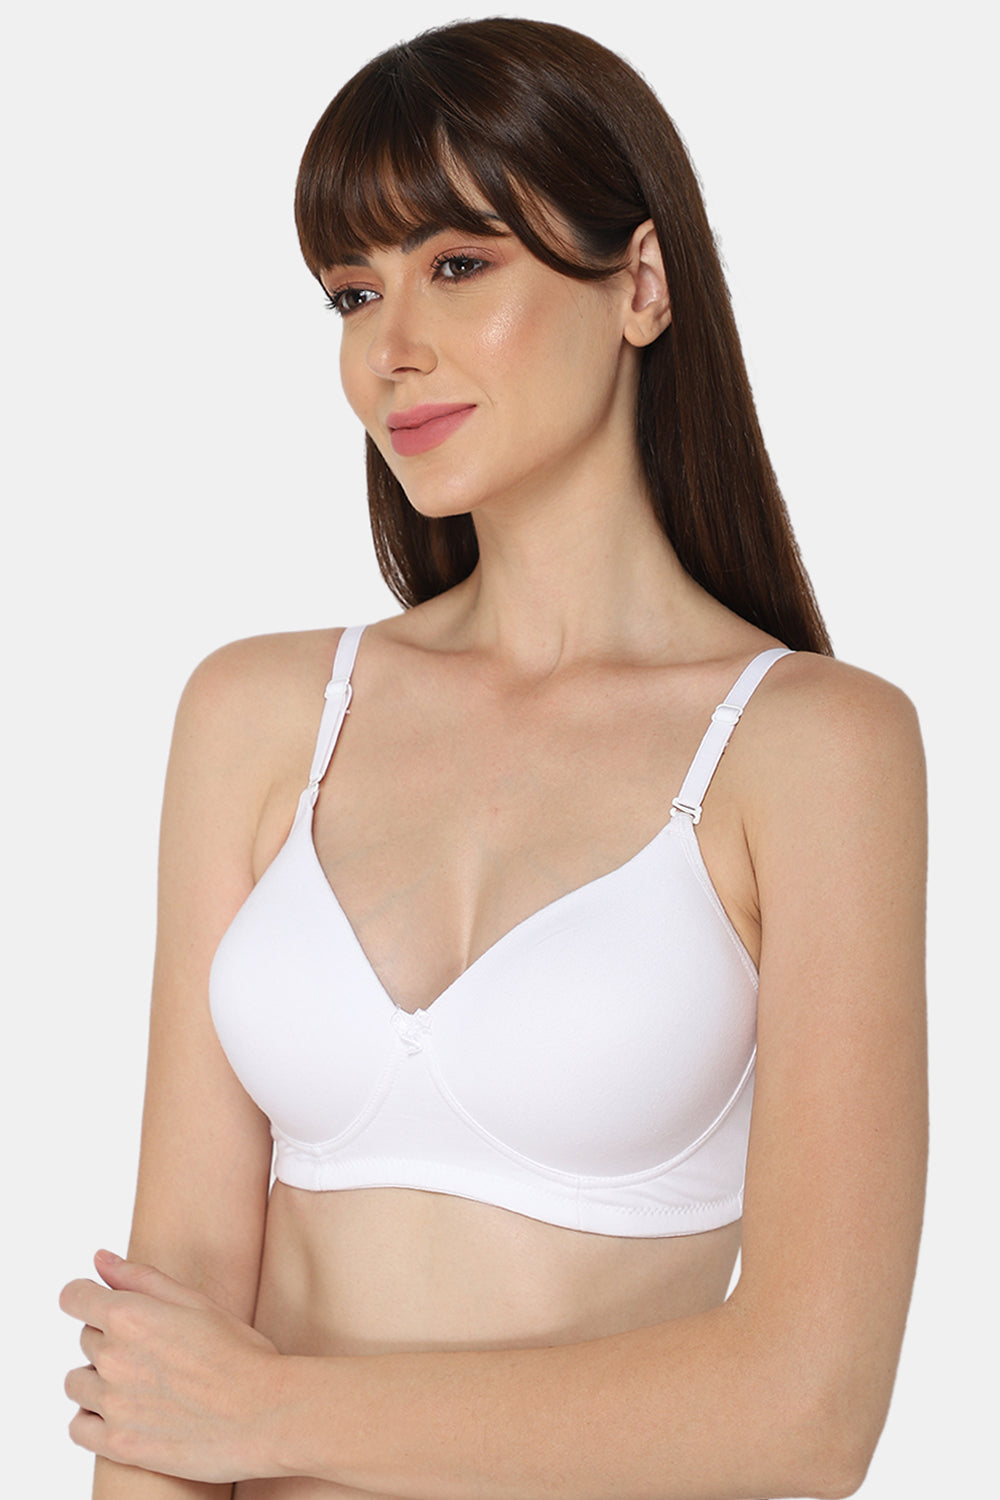 Intimacy Everyday T-Shirt Padded Bra - UC02 Size   Blue Atoll Color 32B